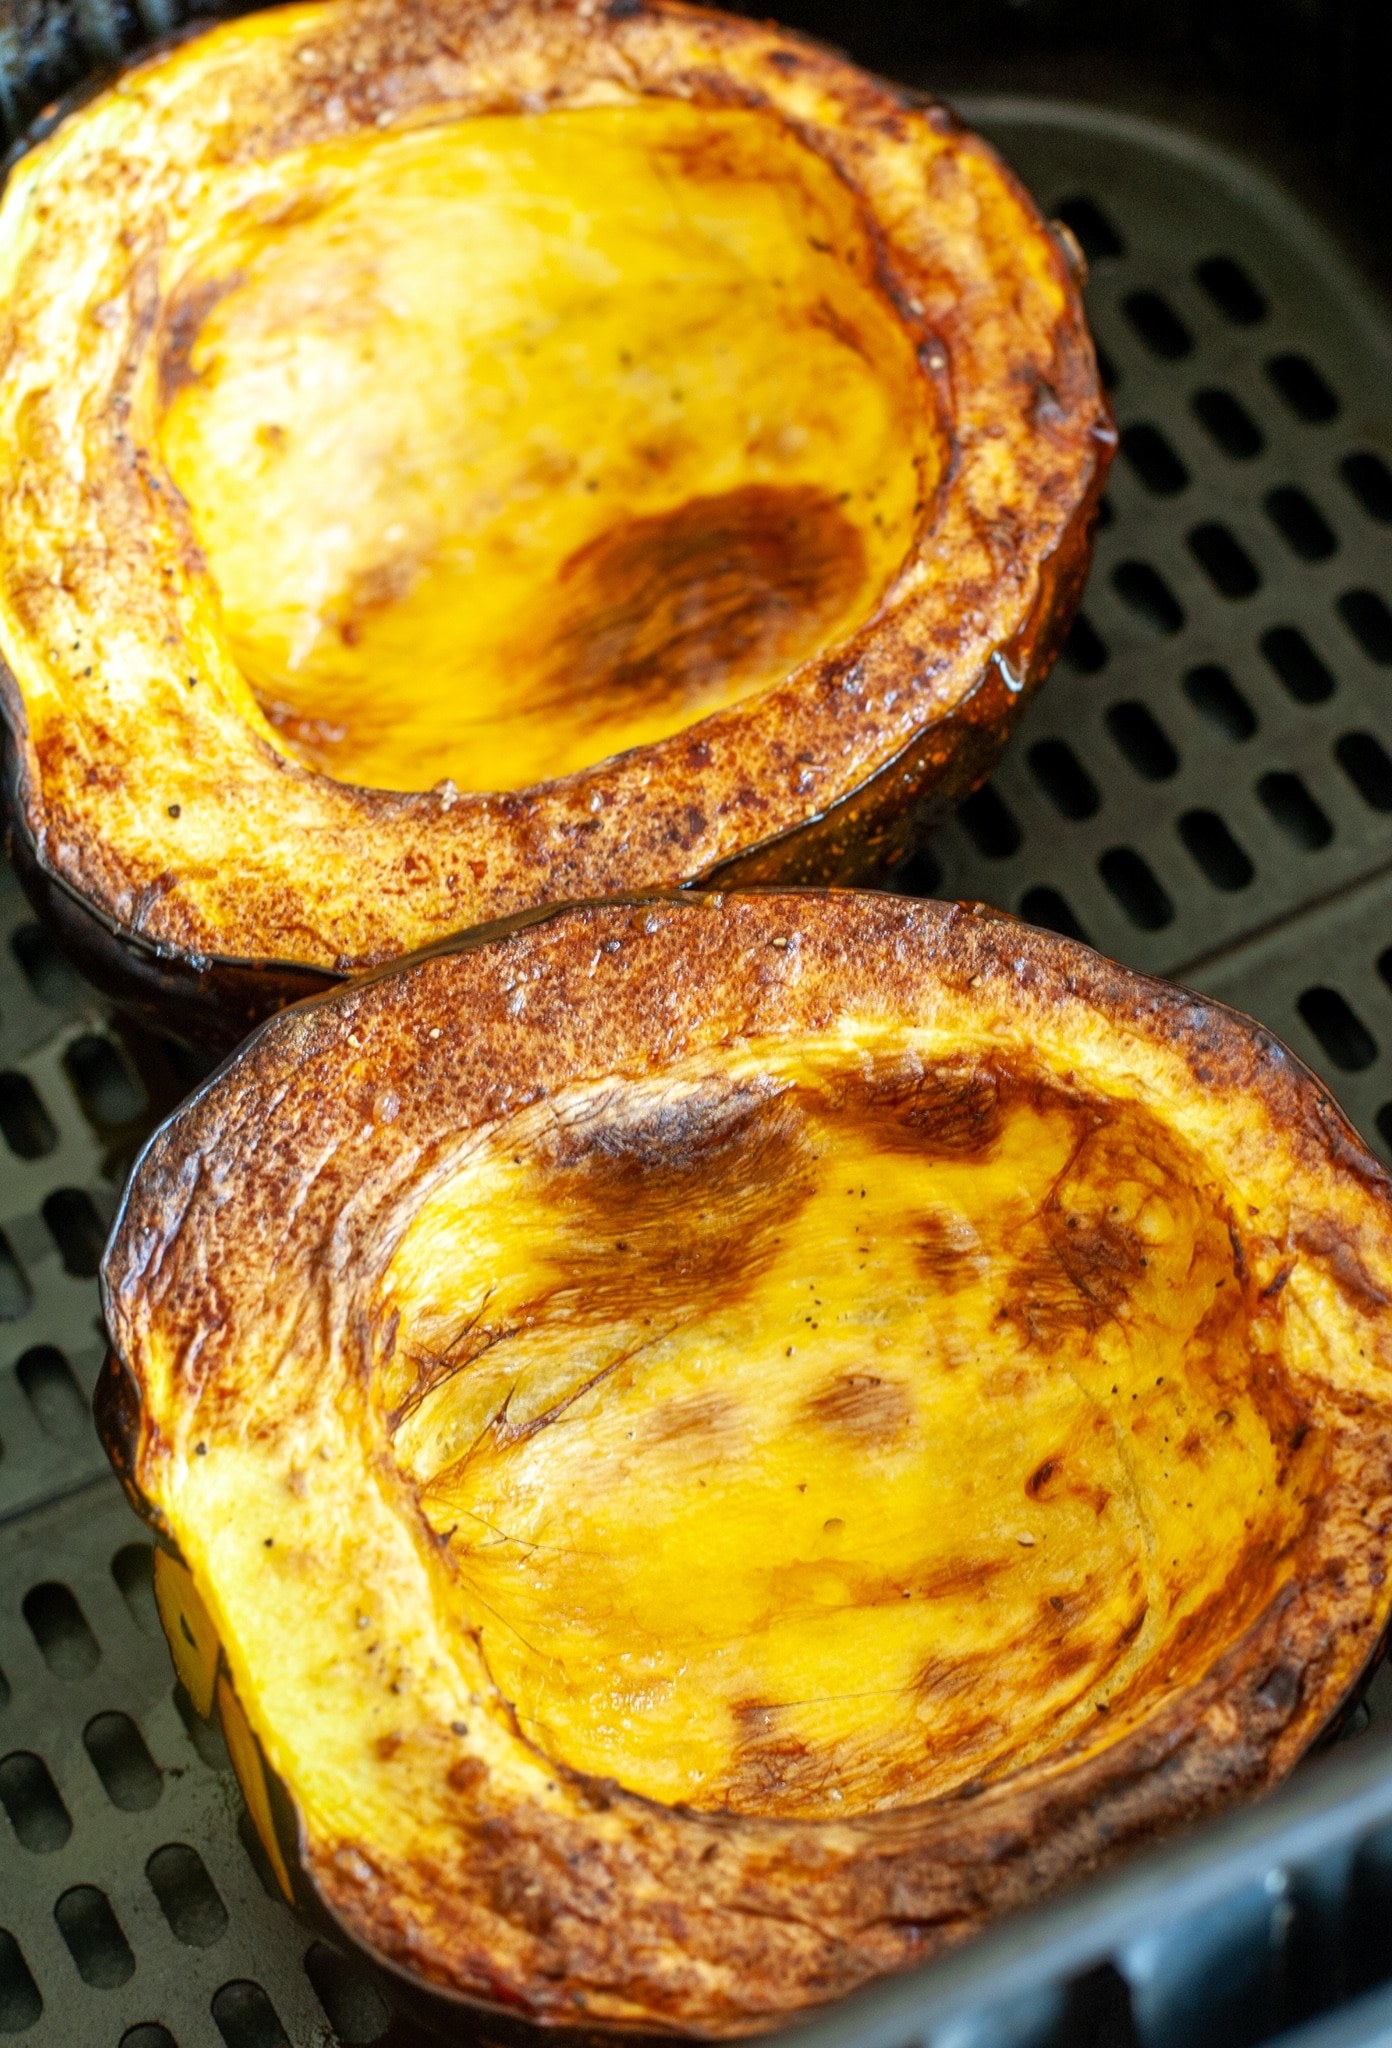 A halved acorn squash in the air fryer.